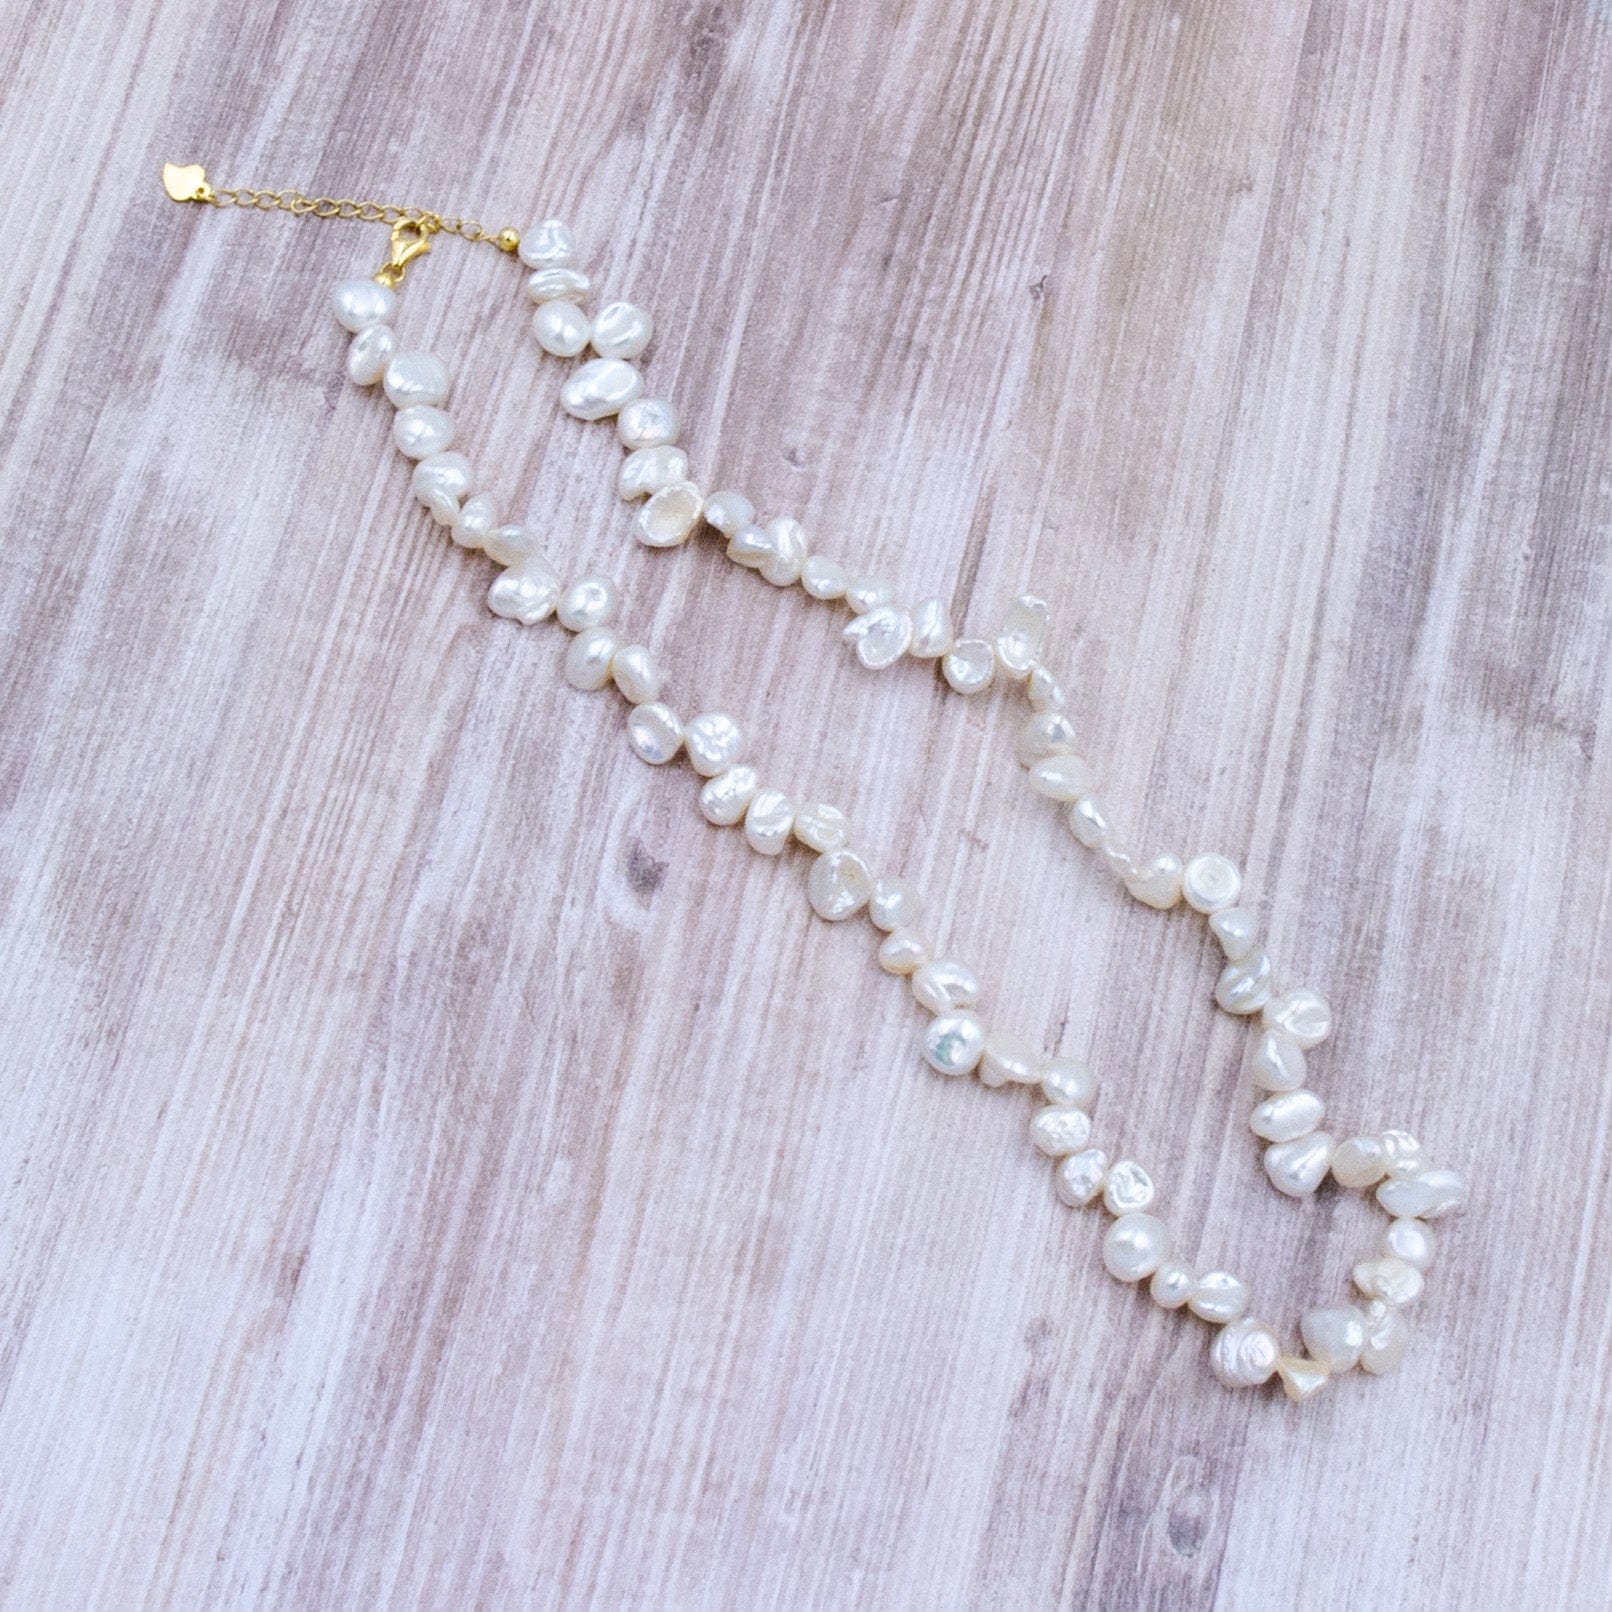 Cheekoo's Handcrafted Freshwater White Keshi Pearl Strand Gold Necklace, 6-10 mm Pearls, 15-17" Strand